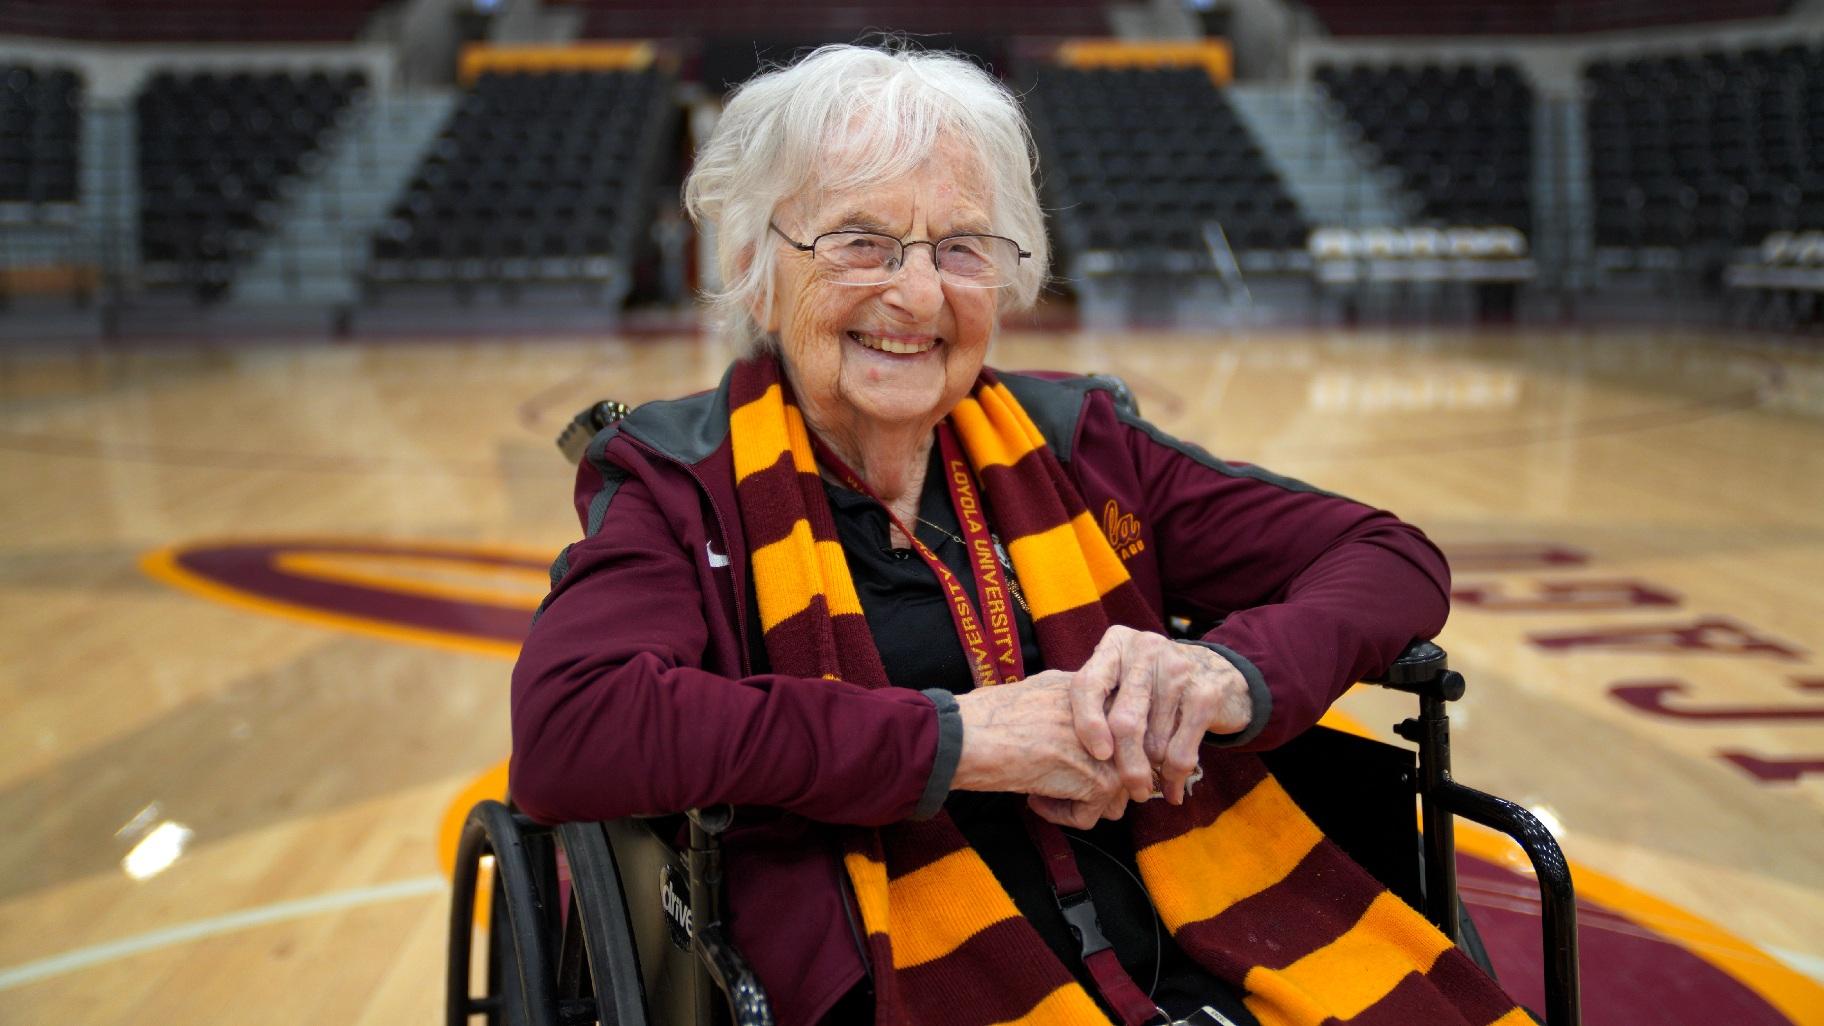 Sister Jean Dolores Schmidt, the Loyola University men's basketball chaplain and school celebrity, sits for a portrait in The Joseph J. Gentile Arena, on Monday, Jan. 23, 2023, in Chicago. (AP Photo / Jessie Wardarski)